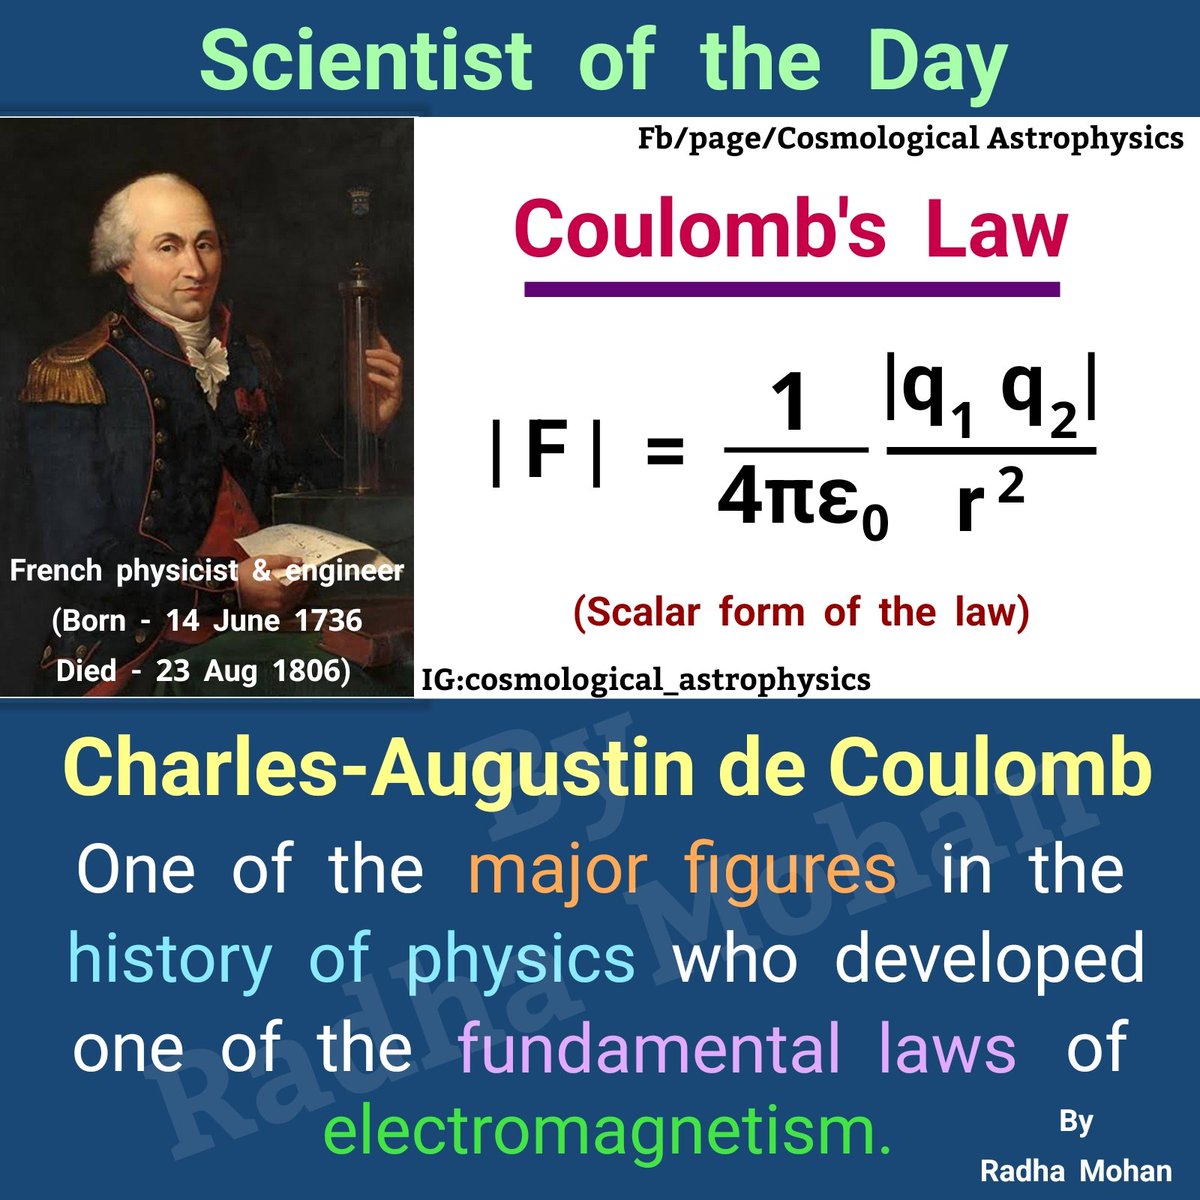 It's the birthday of #CharlesAugustindeCoulomb, one of the major figures in the history of physics - 

(Scientist of the Day - 14 June) 

Coulomb is distinguished in the history of mechanics and of electricity & magnetism. The SI unit of electric charge is named in his honor.